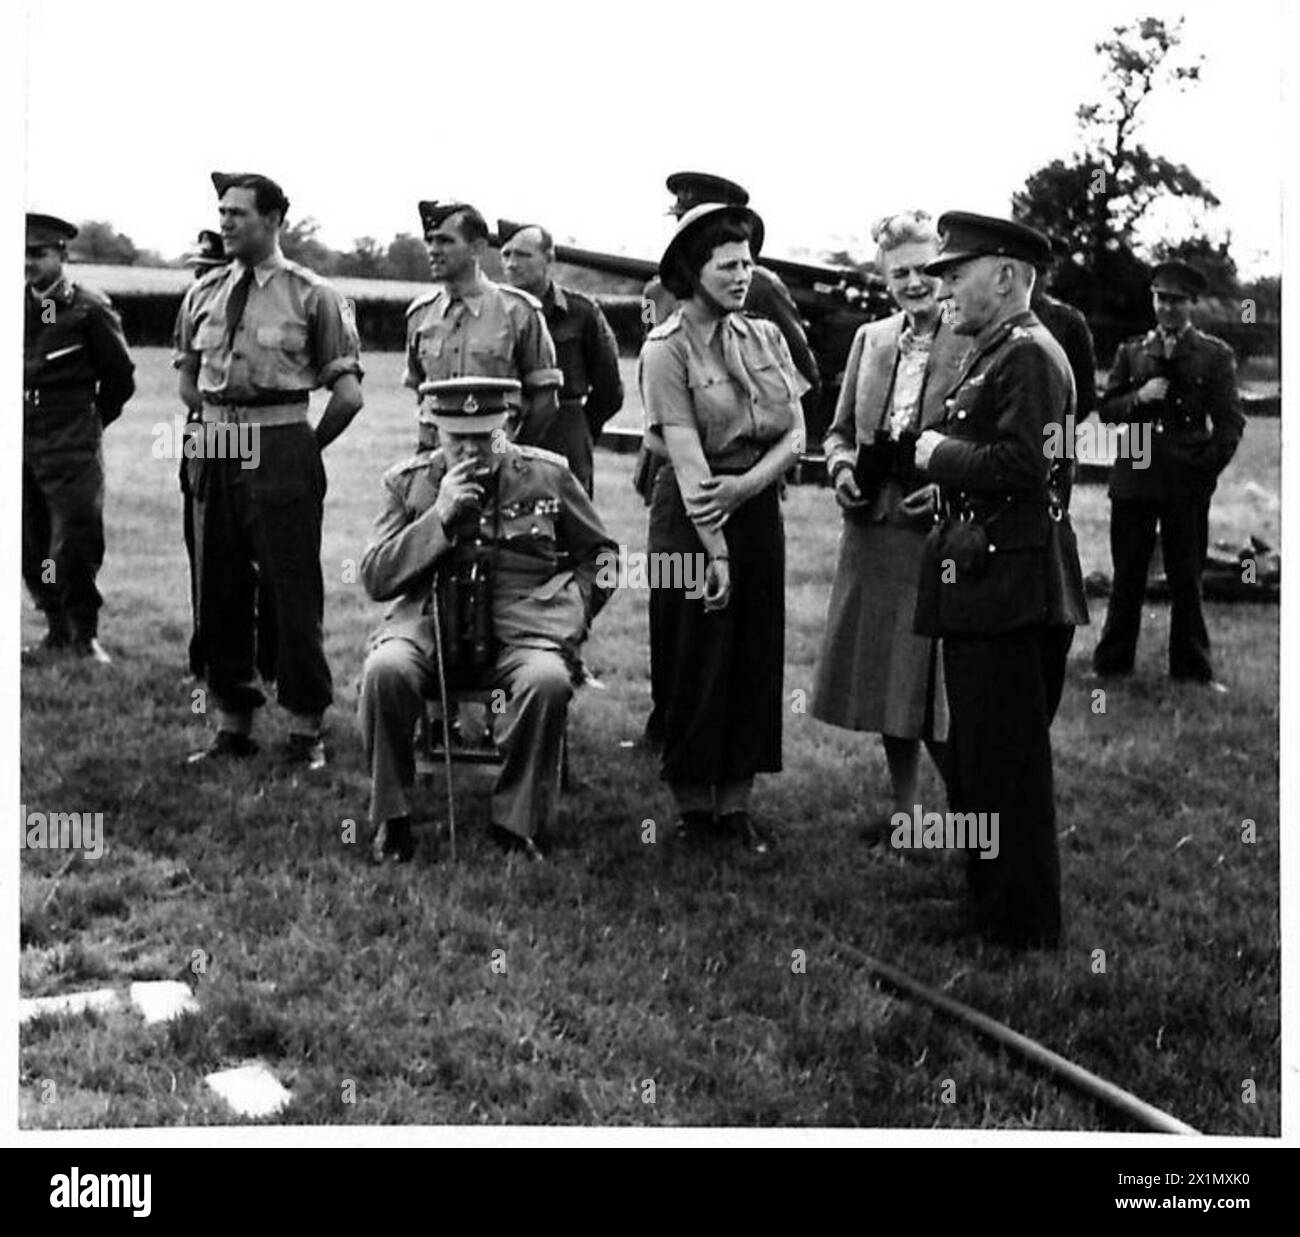 MR. CHURCHILL SEES ANTI-FLYING BOMB DEFENCES - The Prime Minister and Mrs. Churchill met their A.T.S. daughter, Subaltern Mary Churchill at a Mixed Heavy A.A. Battery they visited. On right - General Sir Frederick Pile, British Army Stock Photo